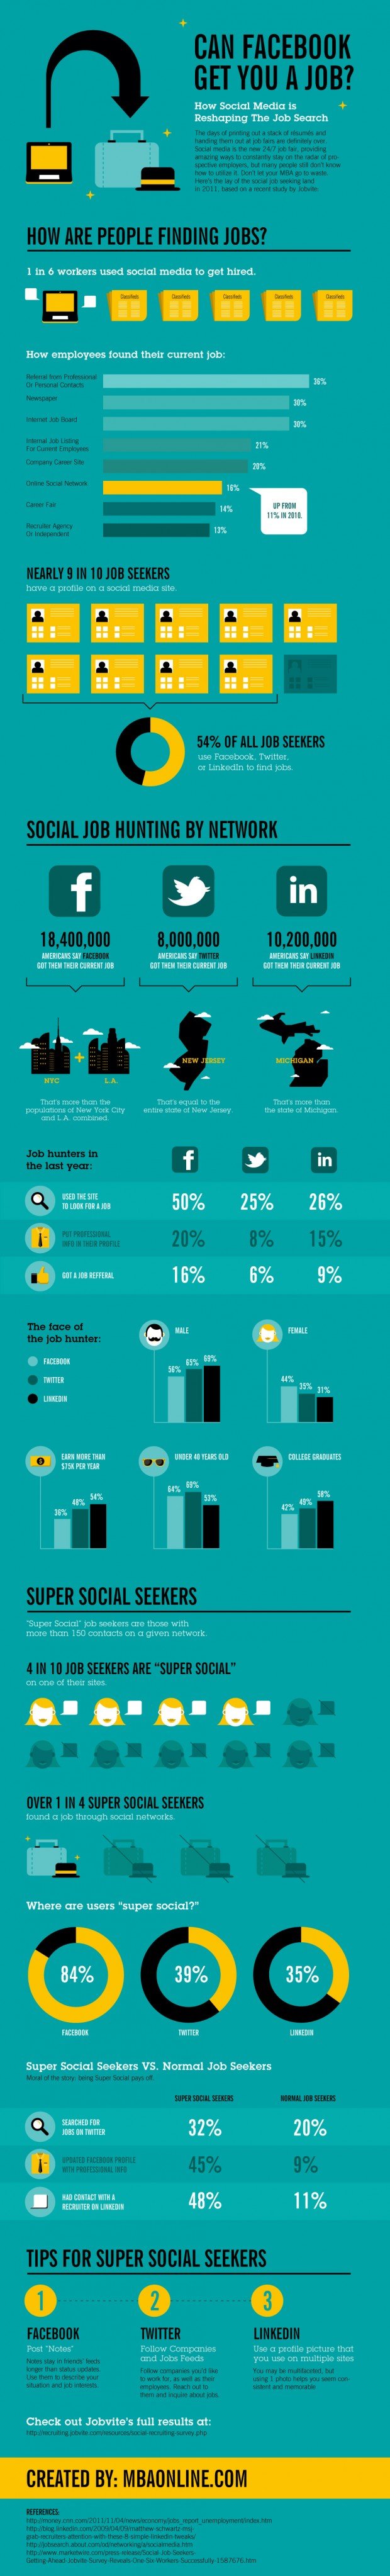 Get A Job From Social Media [Infographic]